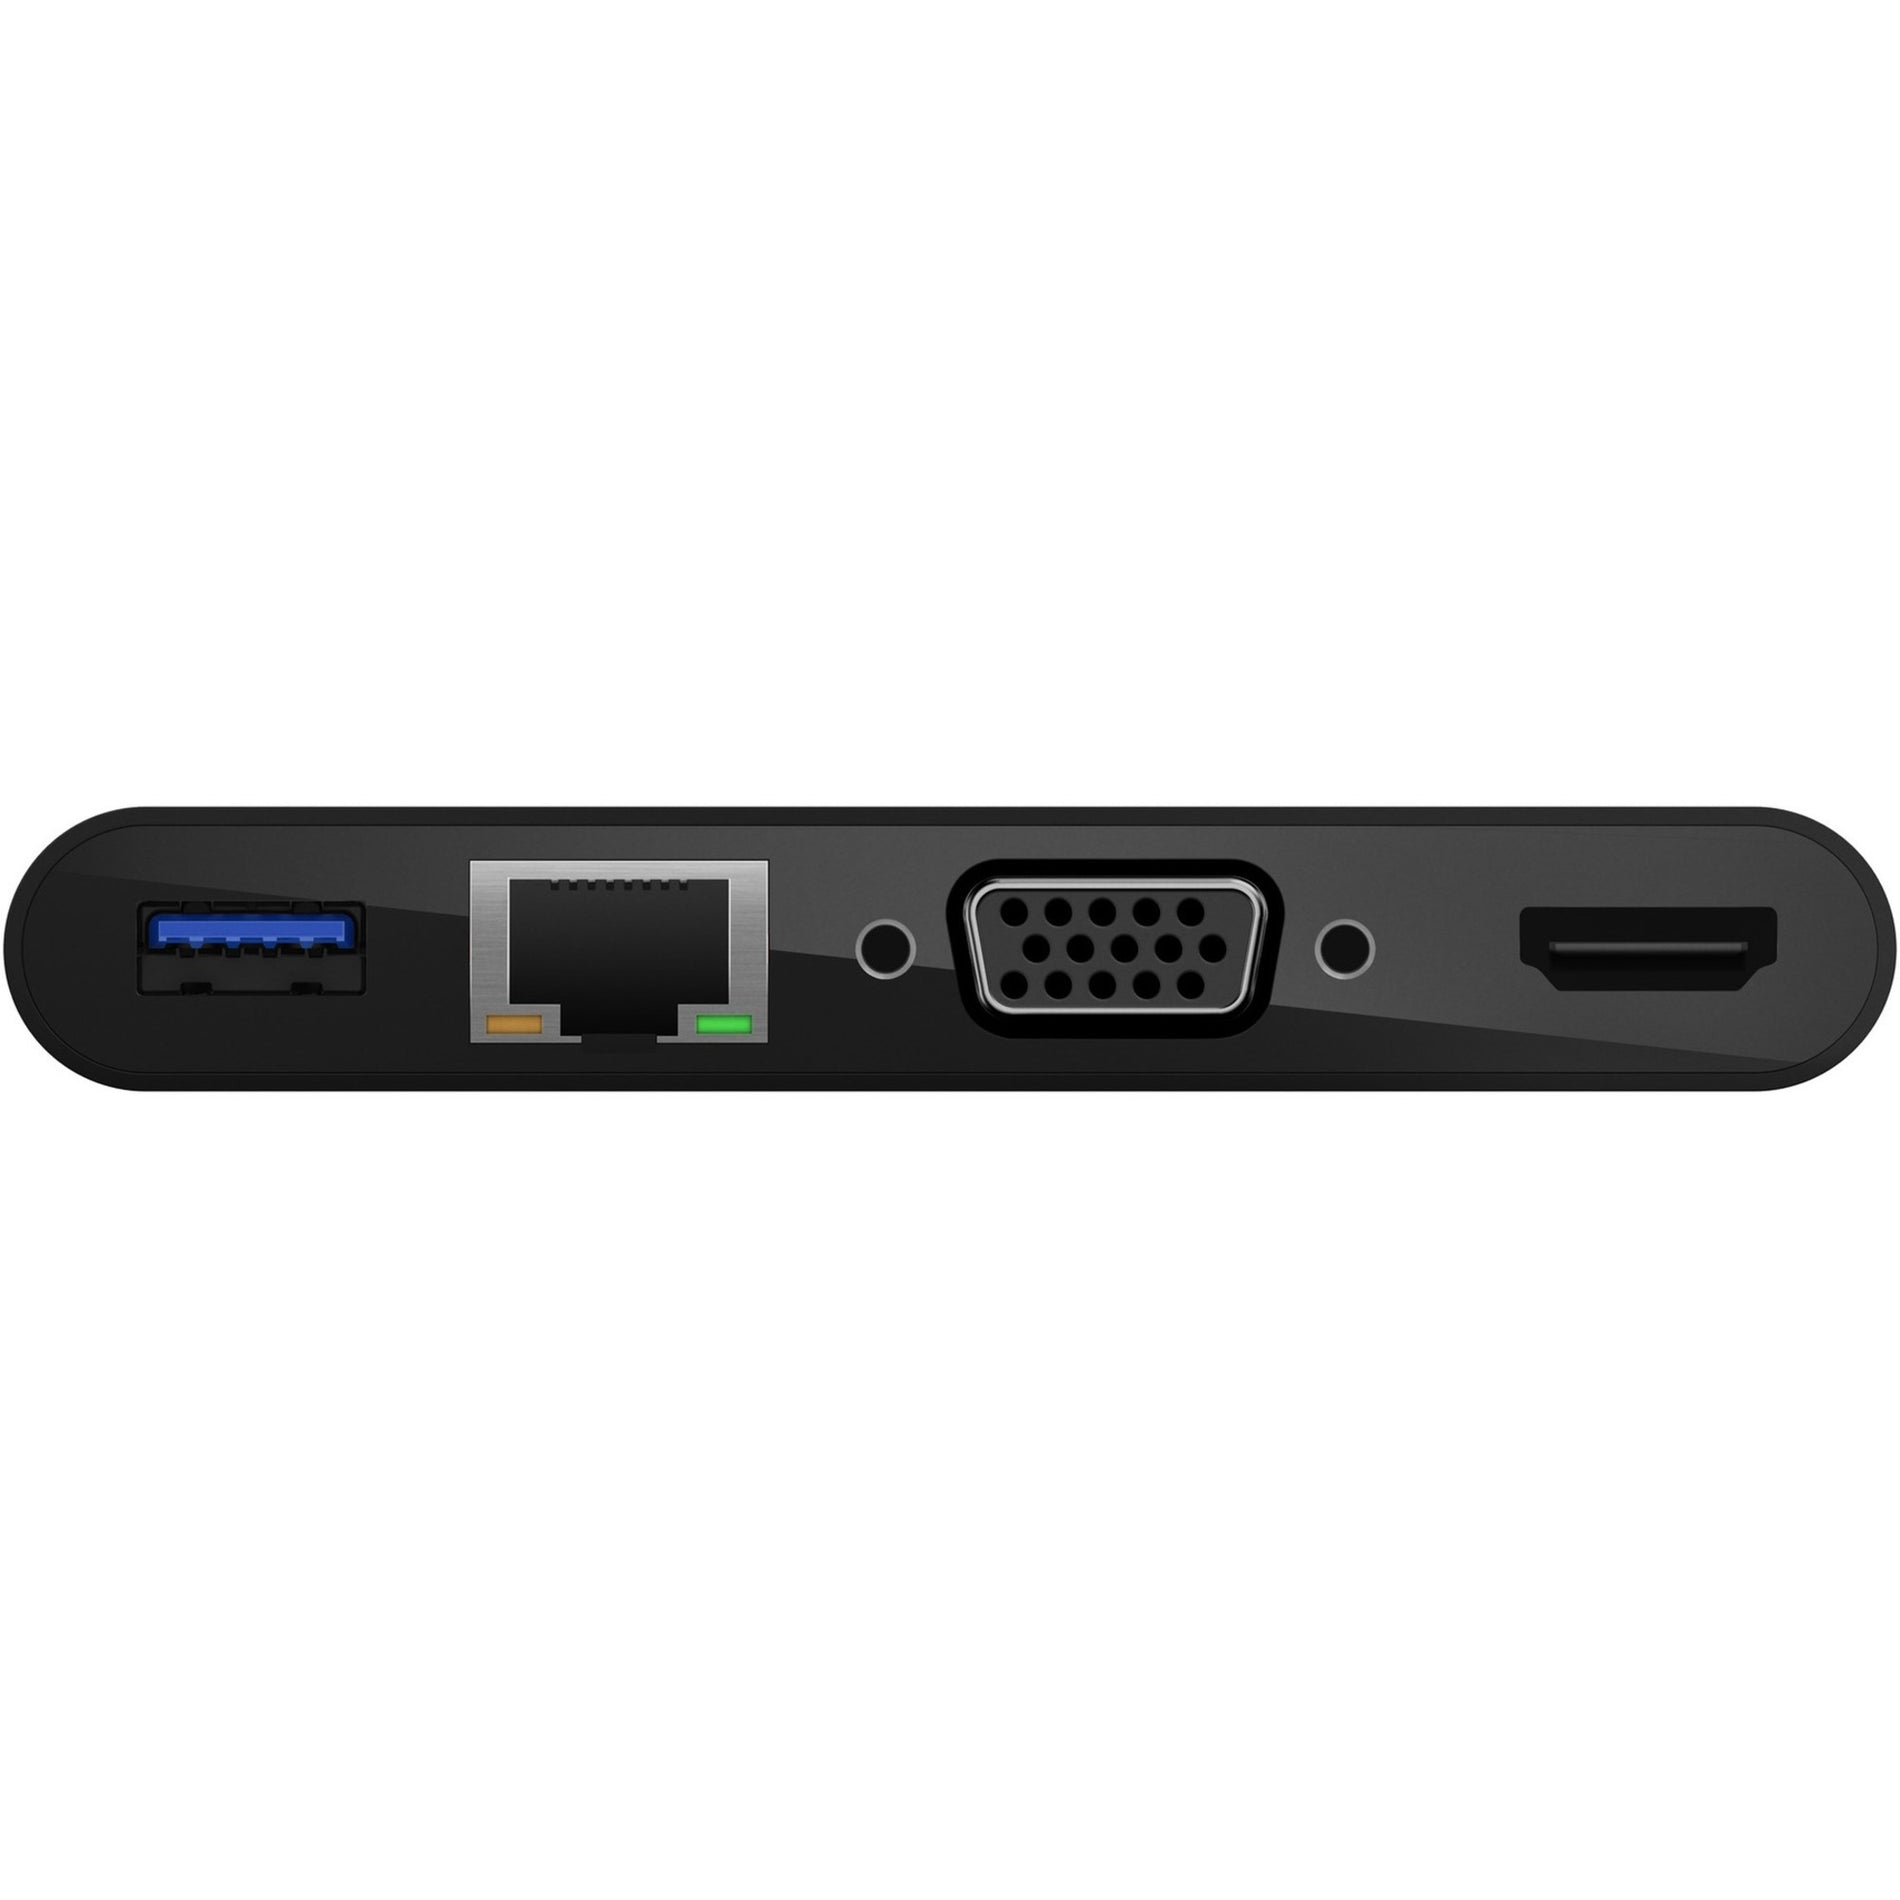 Belkin AVC004BK-BL USB-C Multimedia + Charge Adapter, USB-C to HDMI, USB A 3.0, VGA, up to 100W Power Delivery, up 4k Resolution